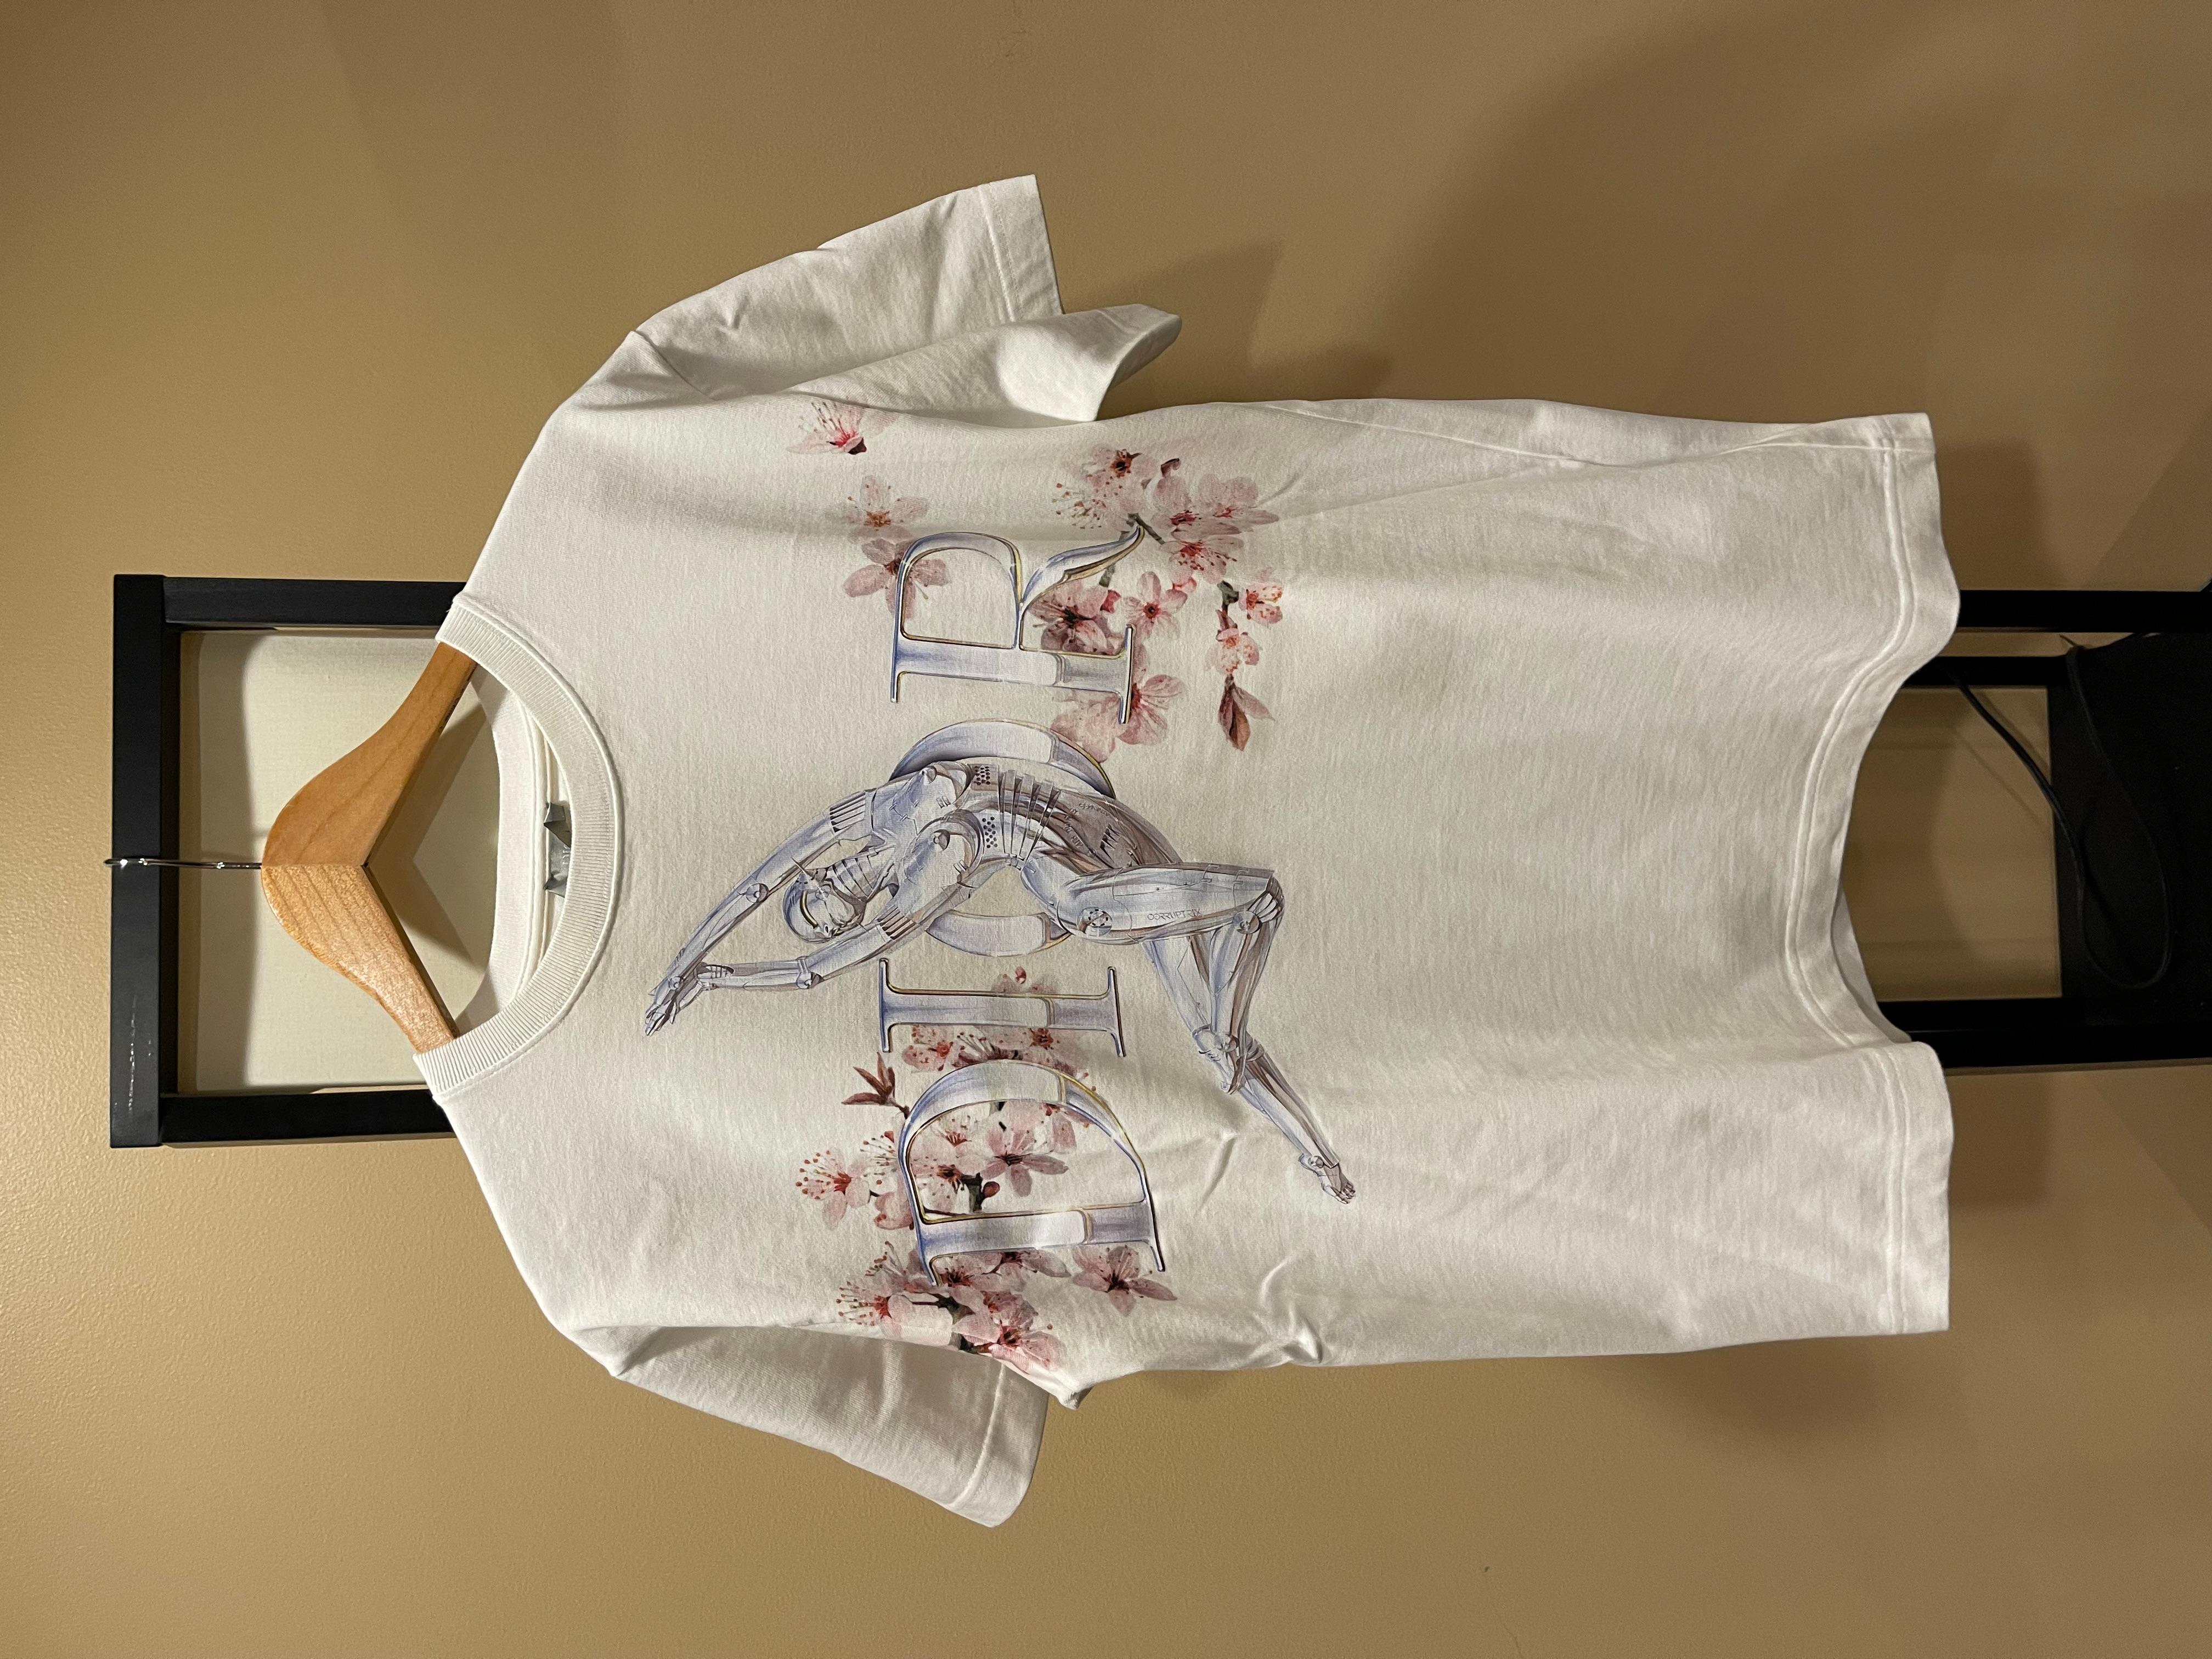 Dior x Kim Jones
Pre-Fall 2019 Sorayama Robot White Tee
Size Large
Excellent condition (worn x1 and dry cleaned x1)

Retailed at $750 plus tax
Rare and sought after tee

Measurements:
Chest: 22”
Length: 28”
Shoulders: 20”